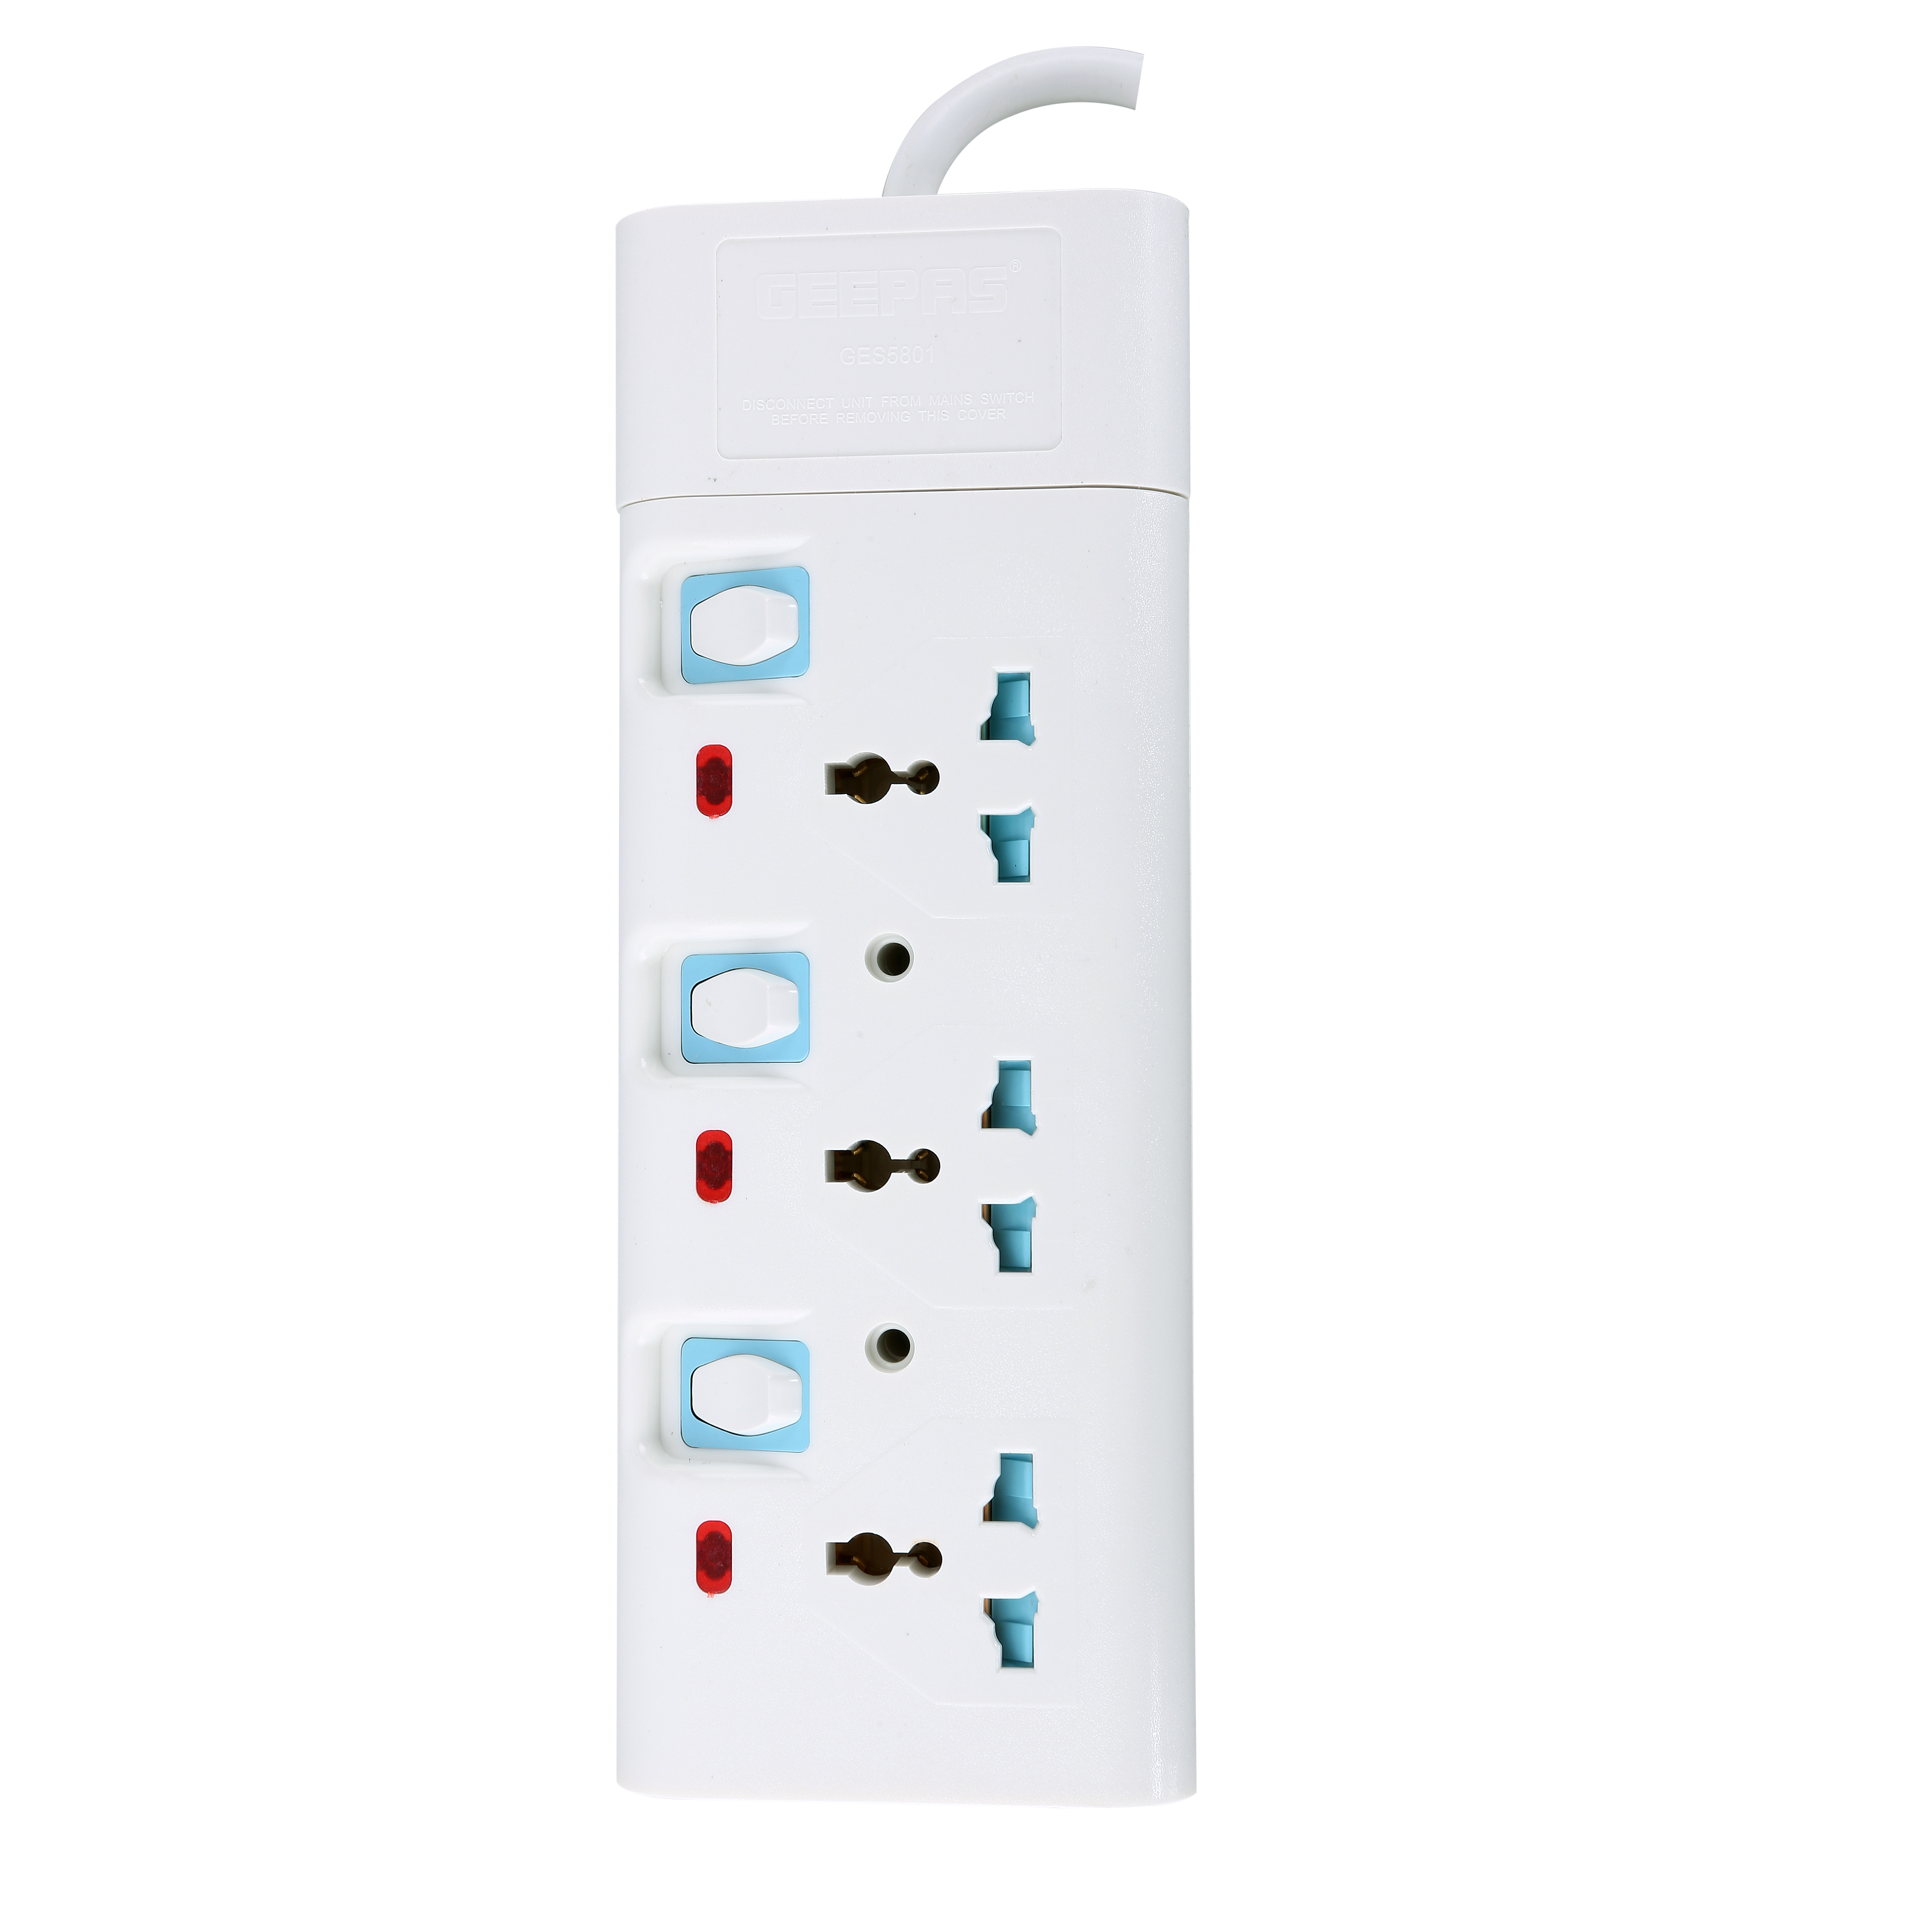 Geepas 3 Way Extension Socket 13A - Extension Lead Strip With LED Indicators | Child Safe, Extra Long Cord With Over Current Protected | Ideal For All Electronic Devices